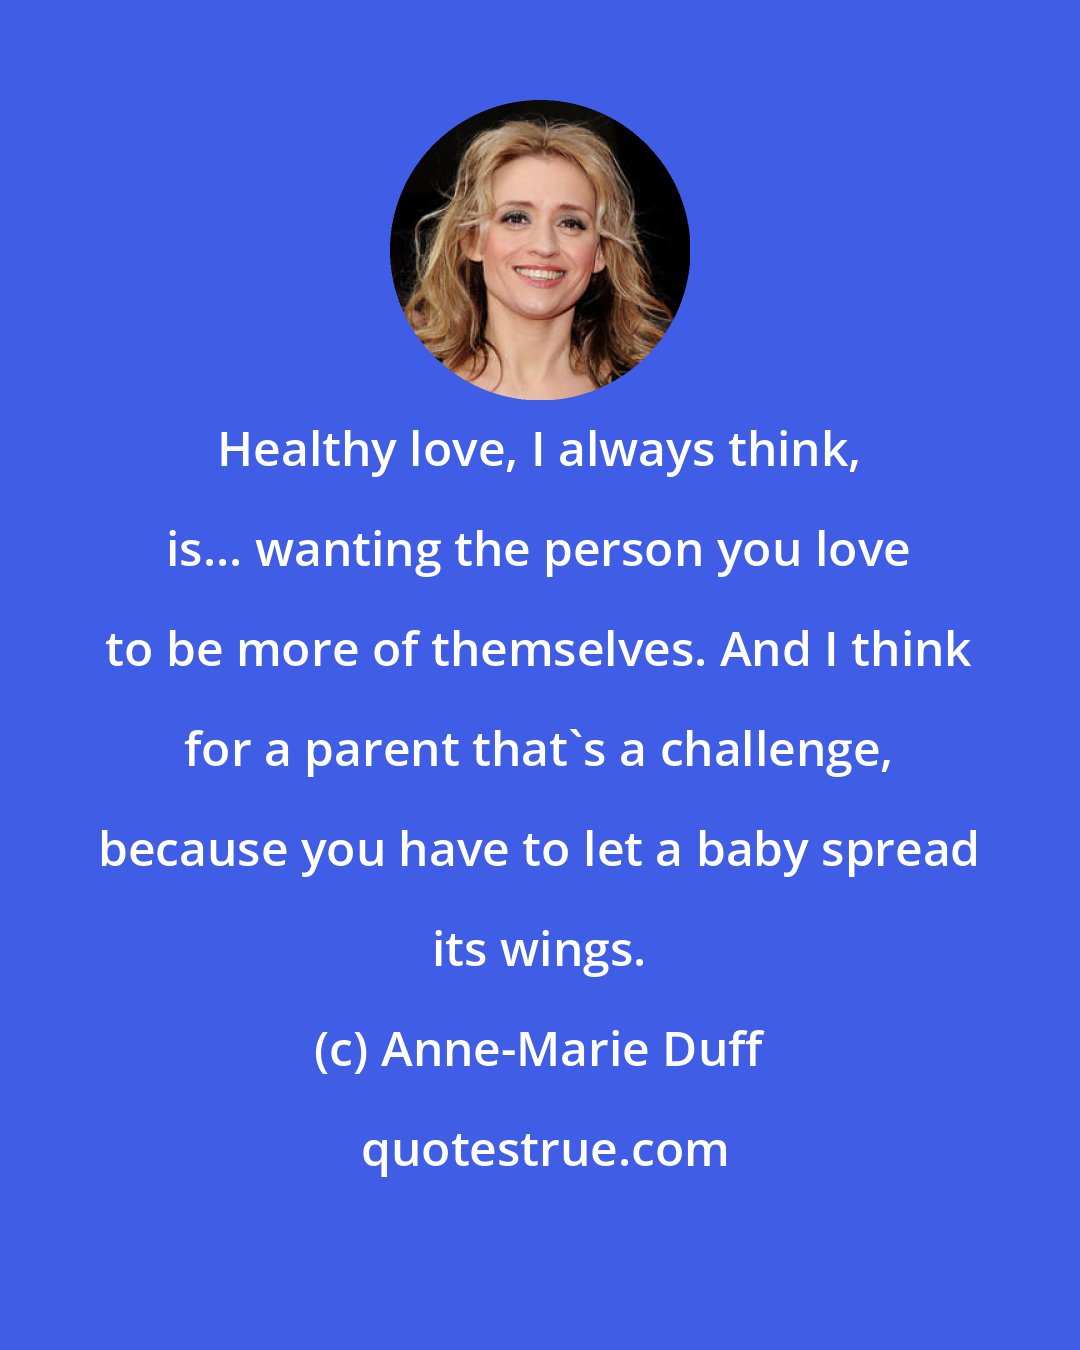 Anne-Marie Duff: Healthy love, I always think, is... wanting the person you love to be more of themselves. And I think for a parent that's a challenge, because you have to let a baby spread its wings.